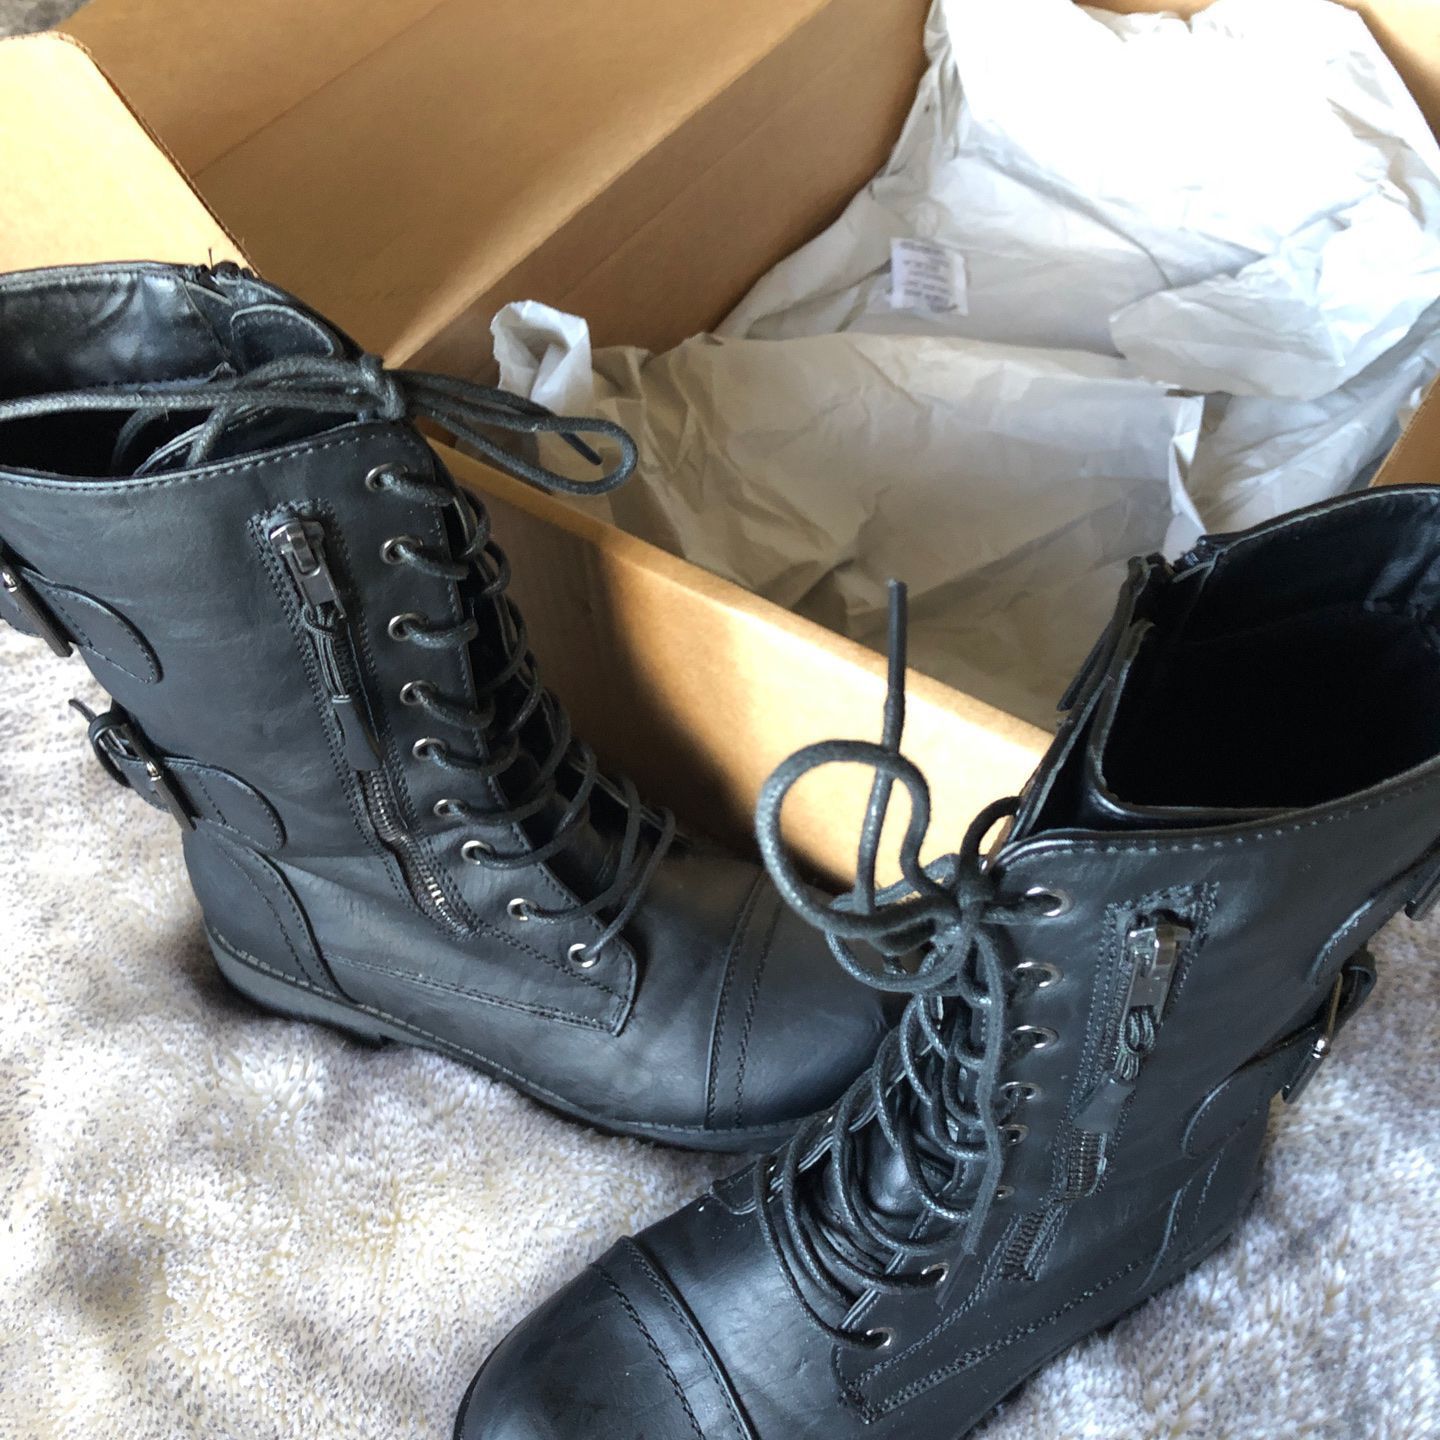 Female Dress Military Style Boots - size 7 🍁 With Pocket On The Side N Zipper